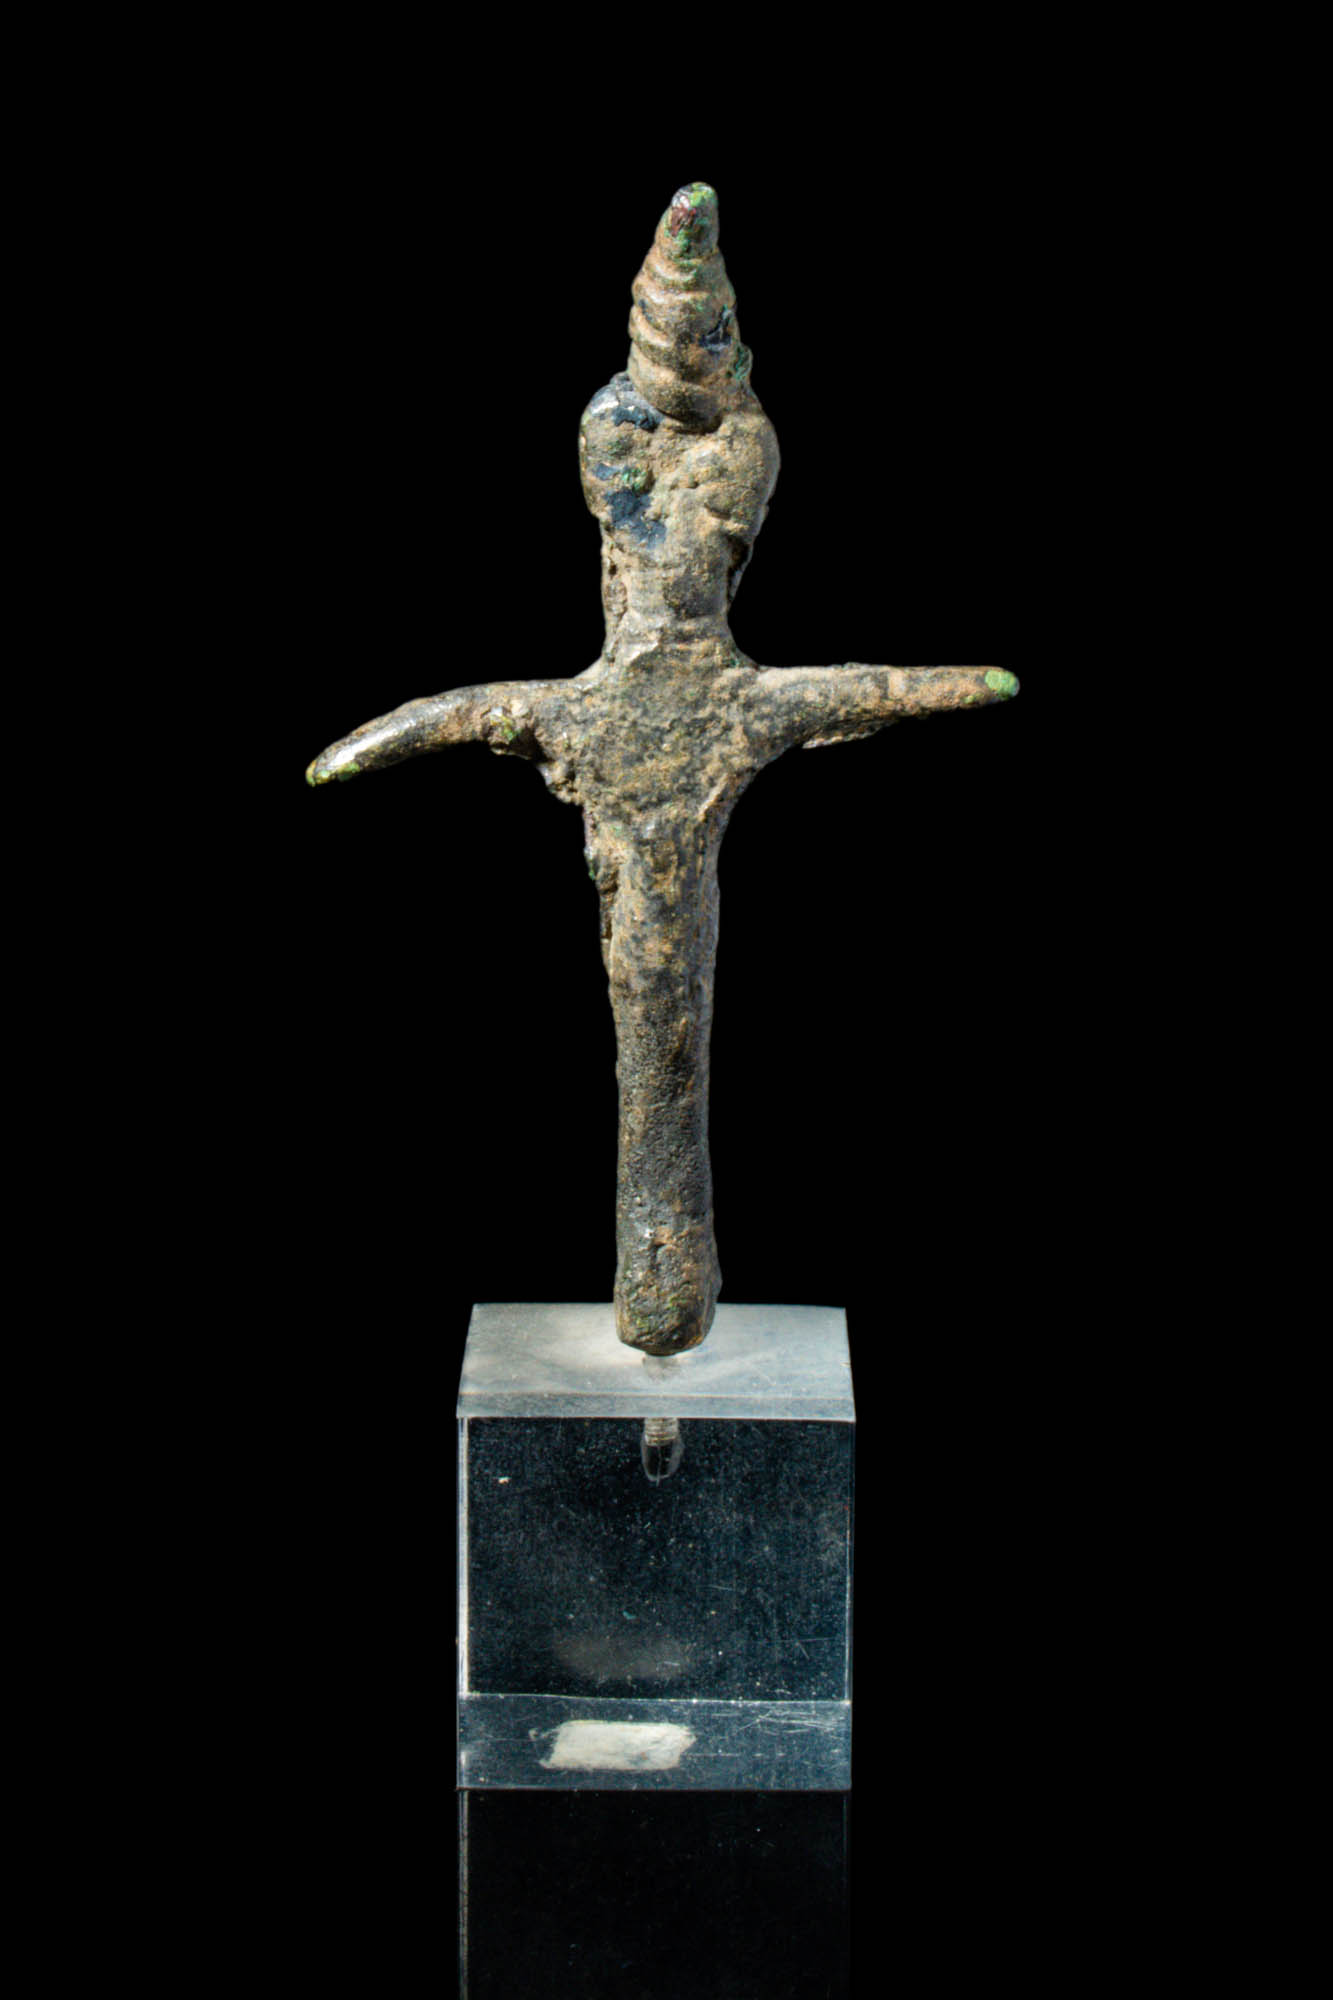 PHOENICIAN STATUETTE CRUCIFORM SHAPED DEPICTING A GODDESS - Image 3 of 3